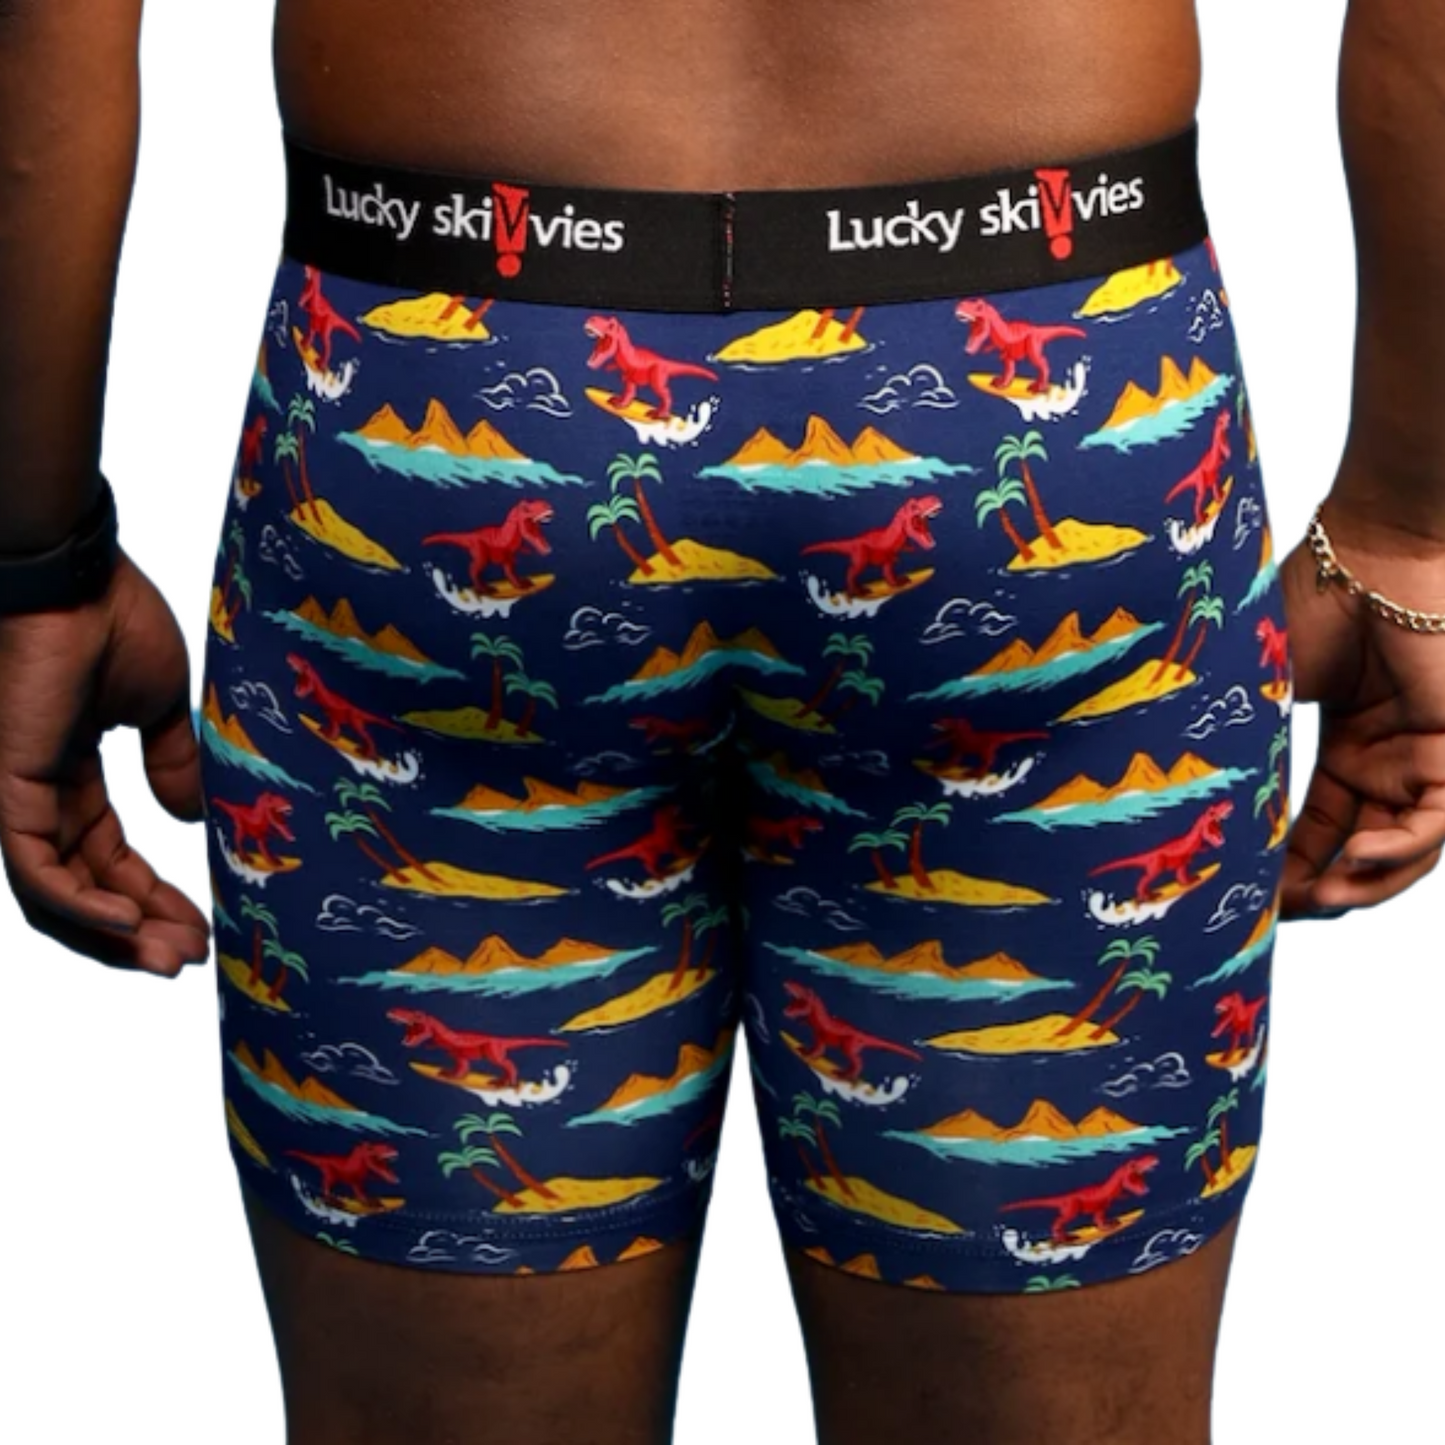 Surfing Dinosaurs Gender Neutral Boxer Briefs by Lucky Skivvies